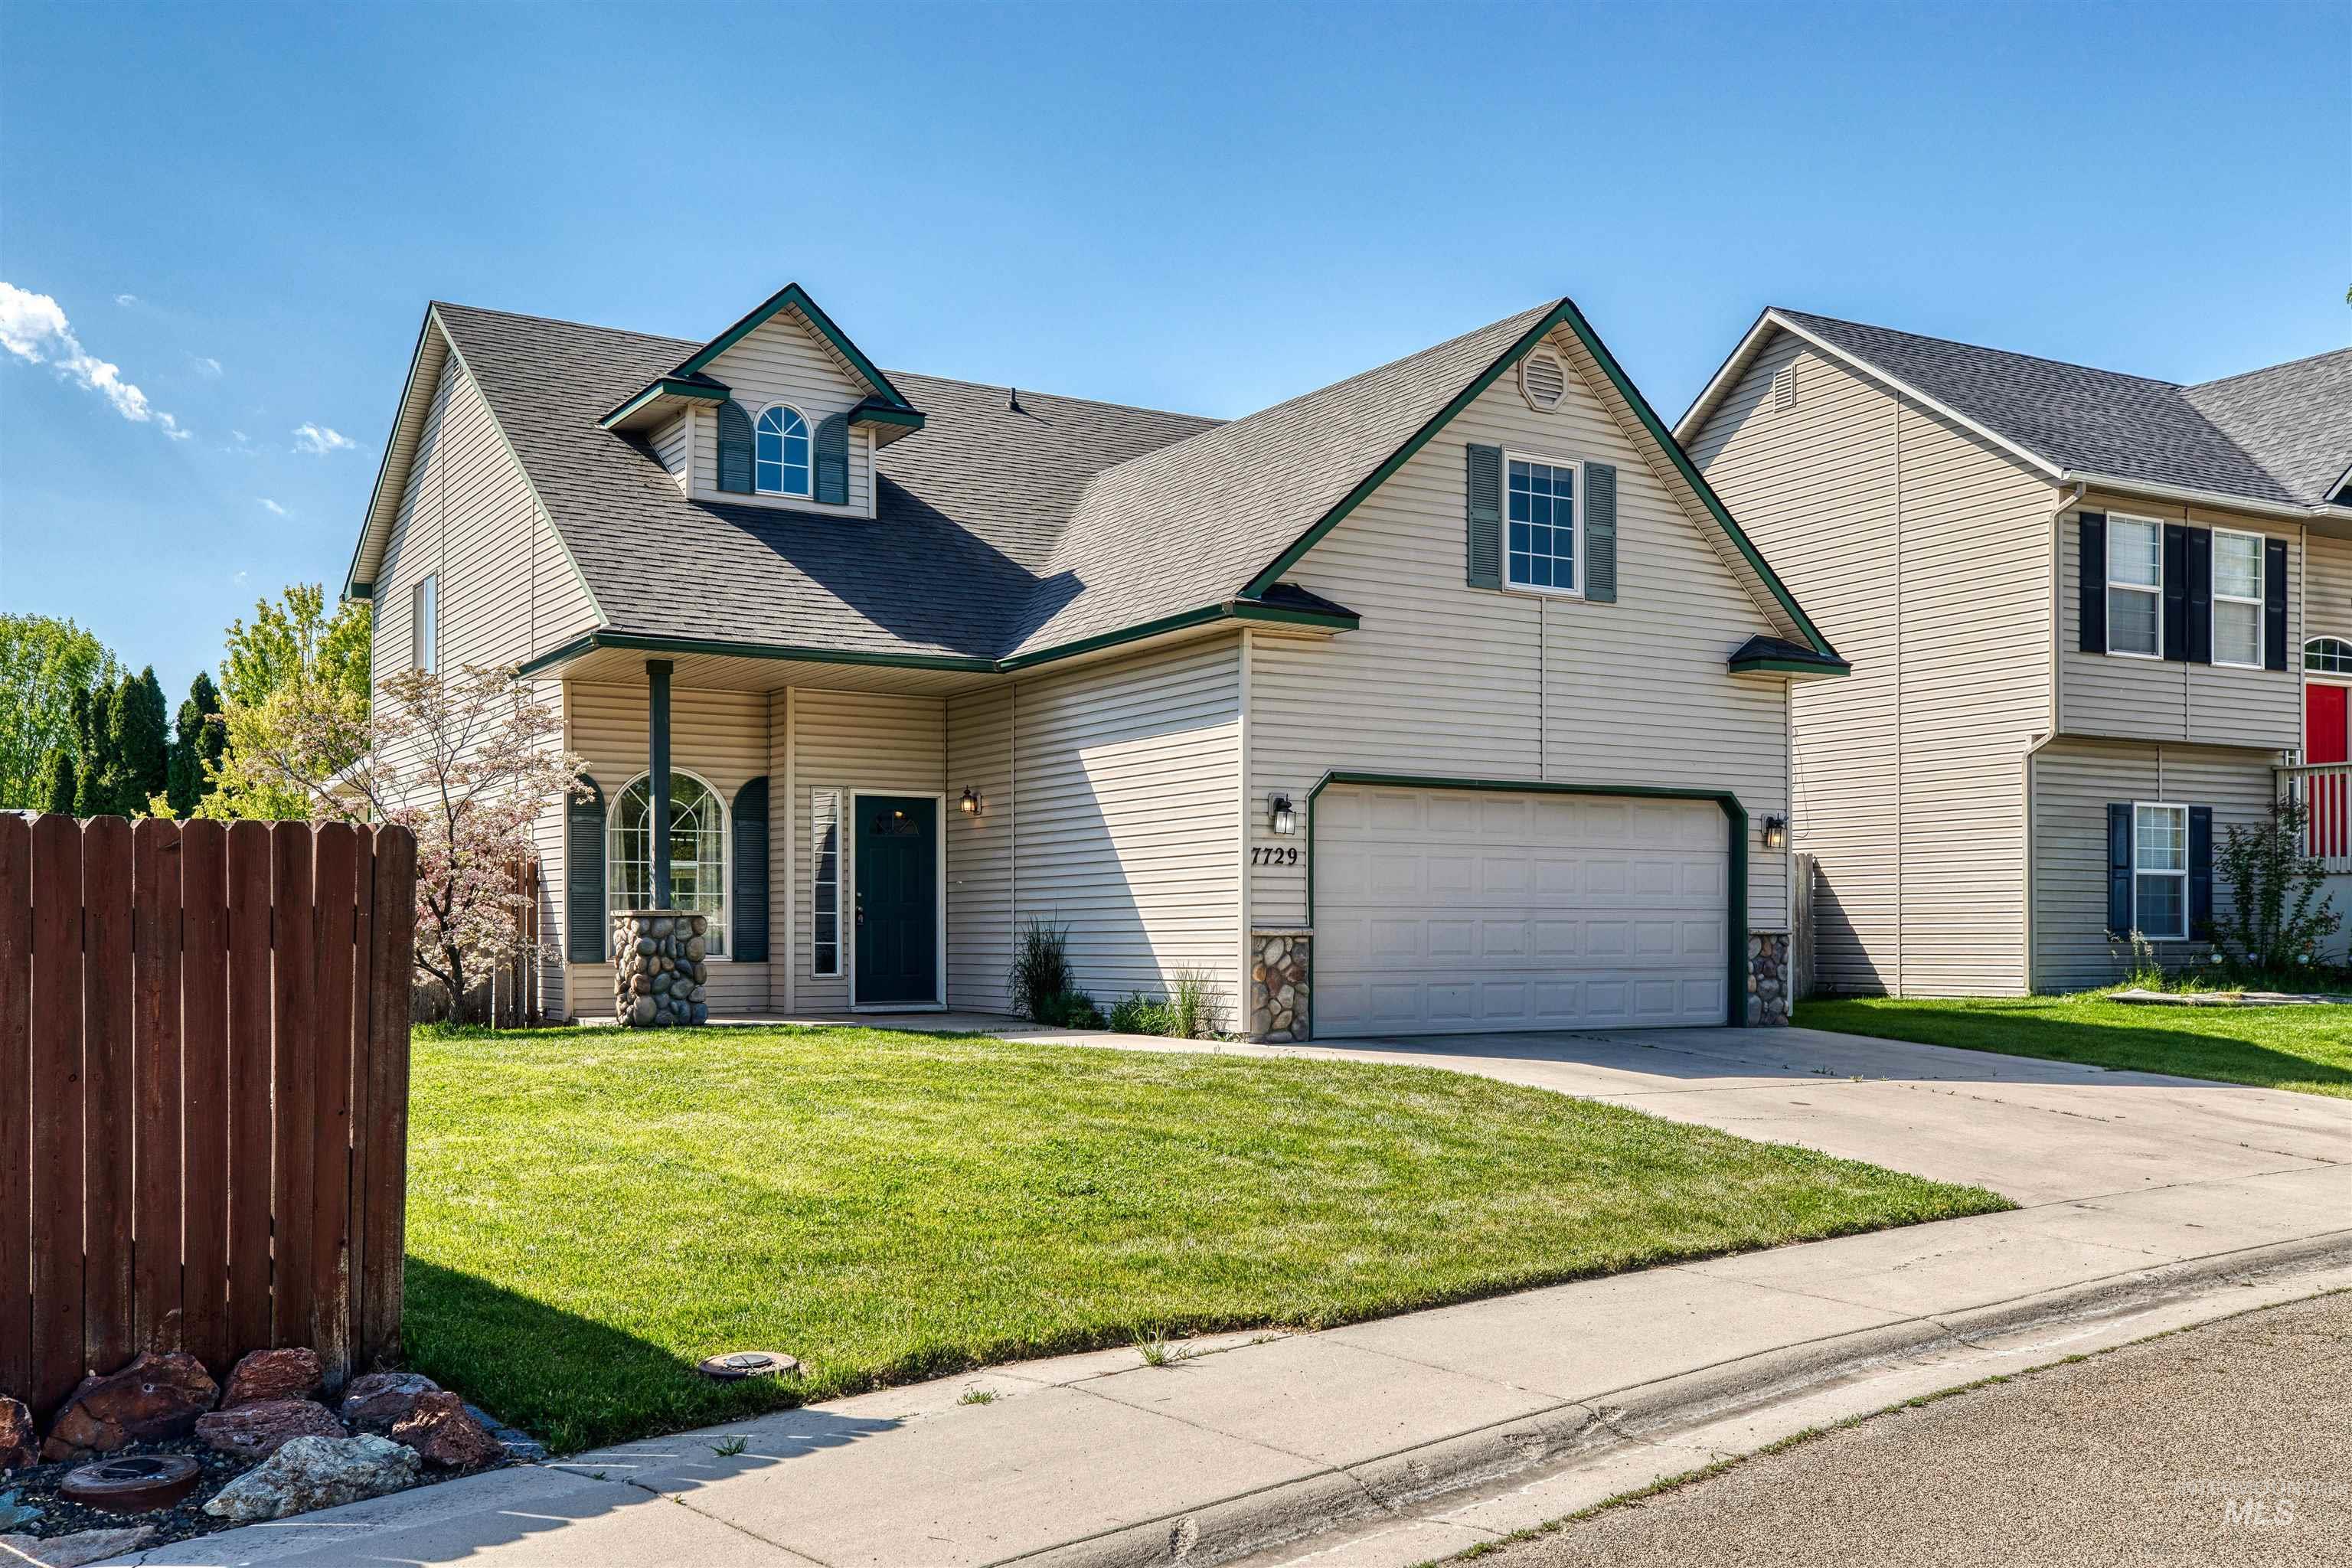 7729 Prism Ct., Nampa, Idaho 83687, 4 Bedrooms, 2.5 Bathrooms, Residential For Sale, Price $399,900,MLS 98910451